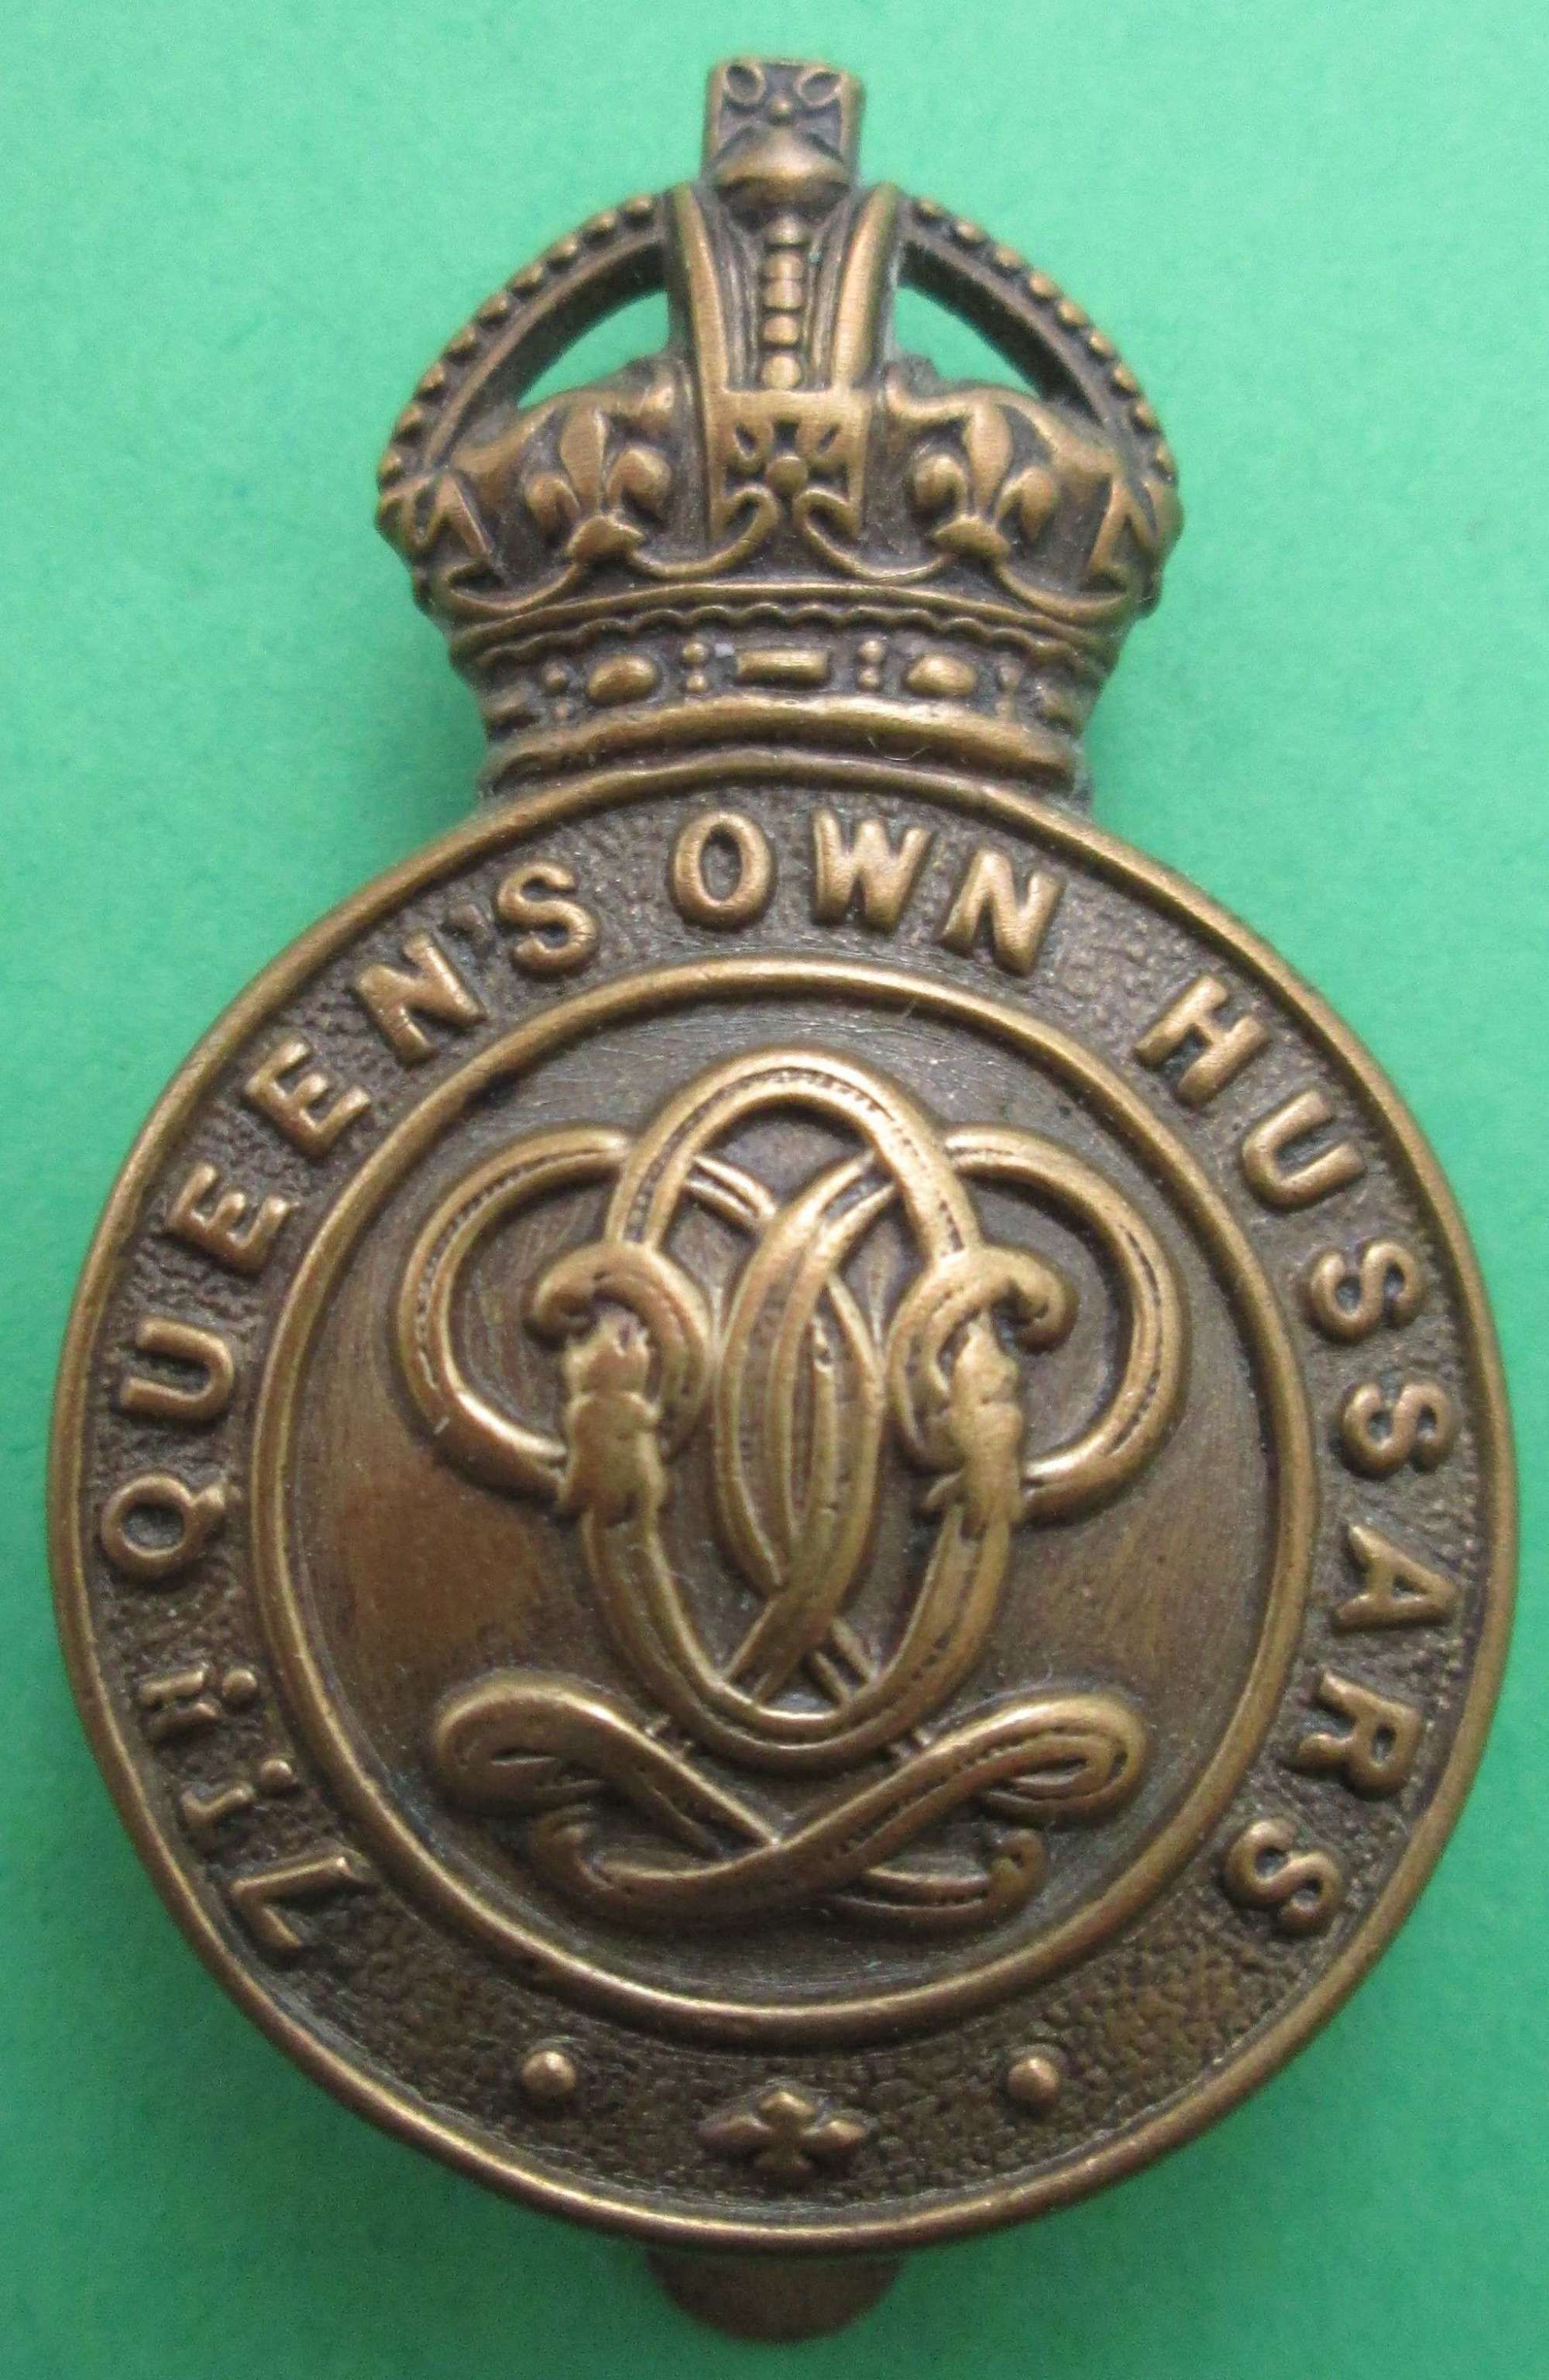 A 7TH QUEEN'S OWN HUSSARS CAP BADGE